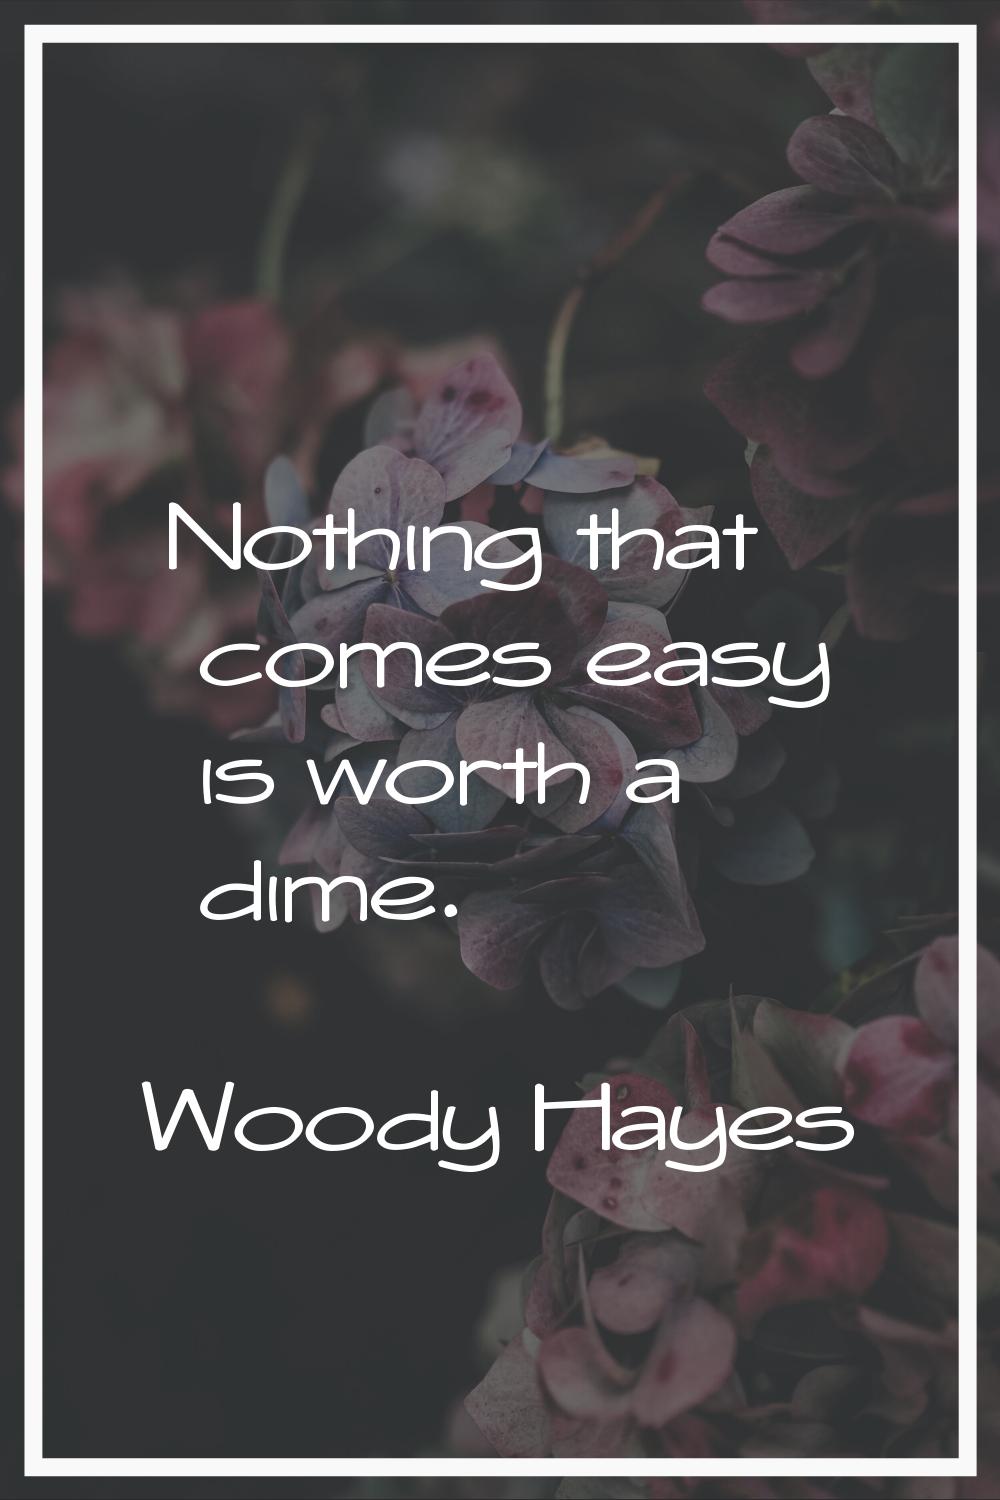 Nothing that comes easy is worth a dime.